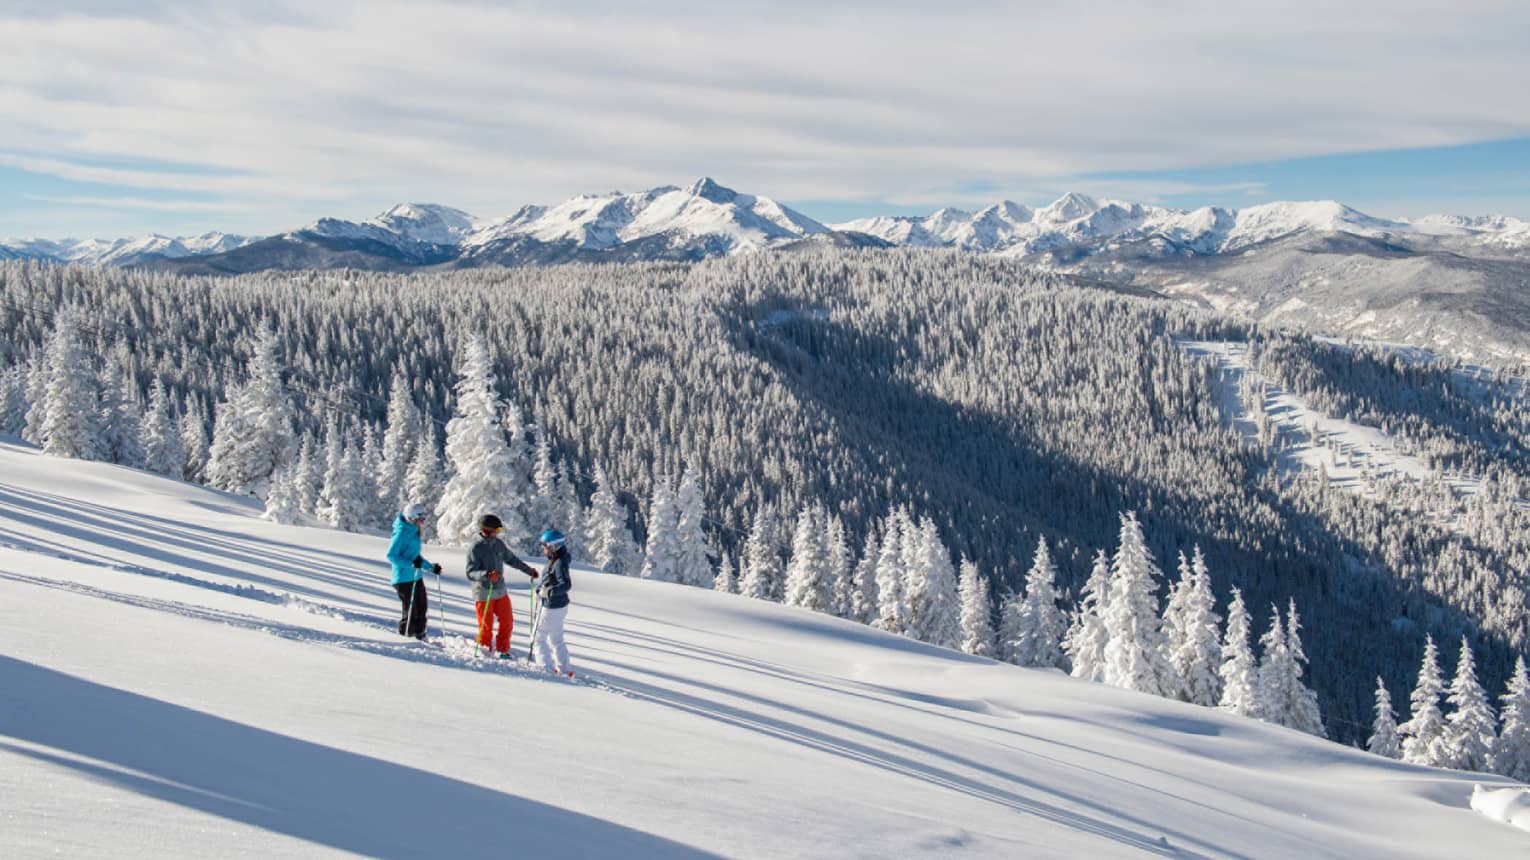 Three guests on skis pause on the ski hill, snow capped trees and mountains in distance 